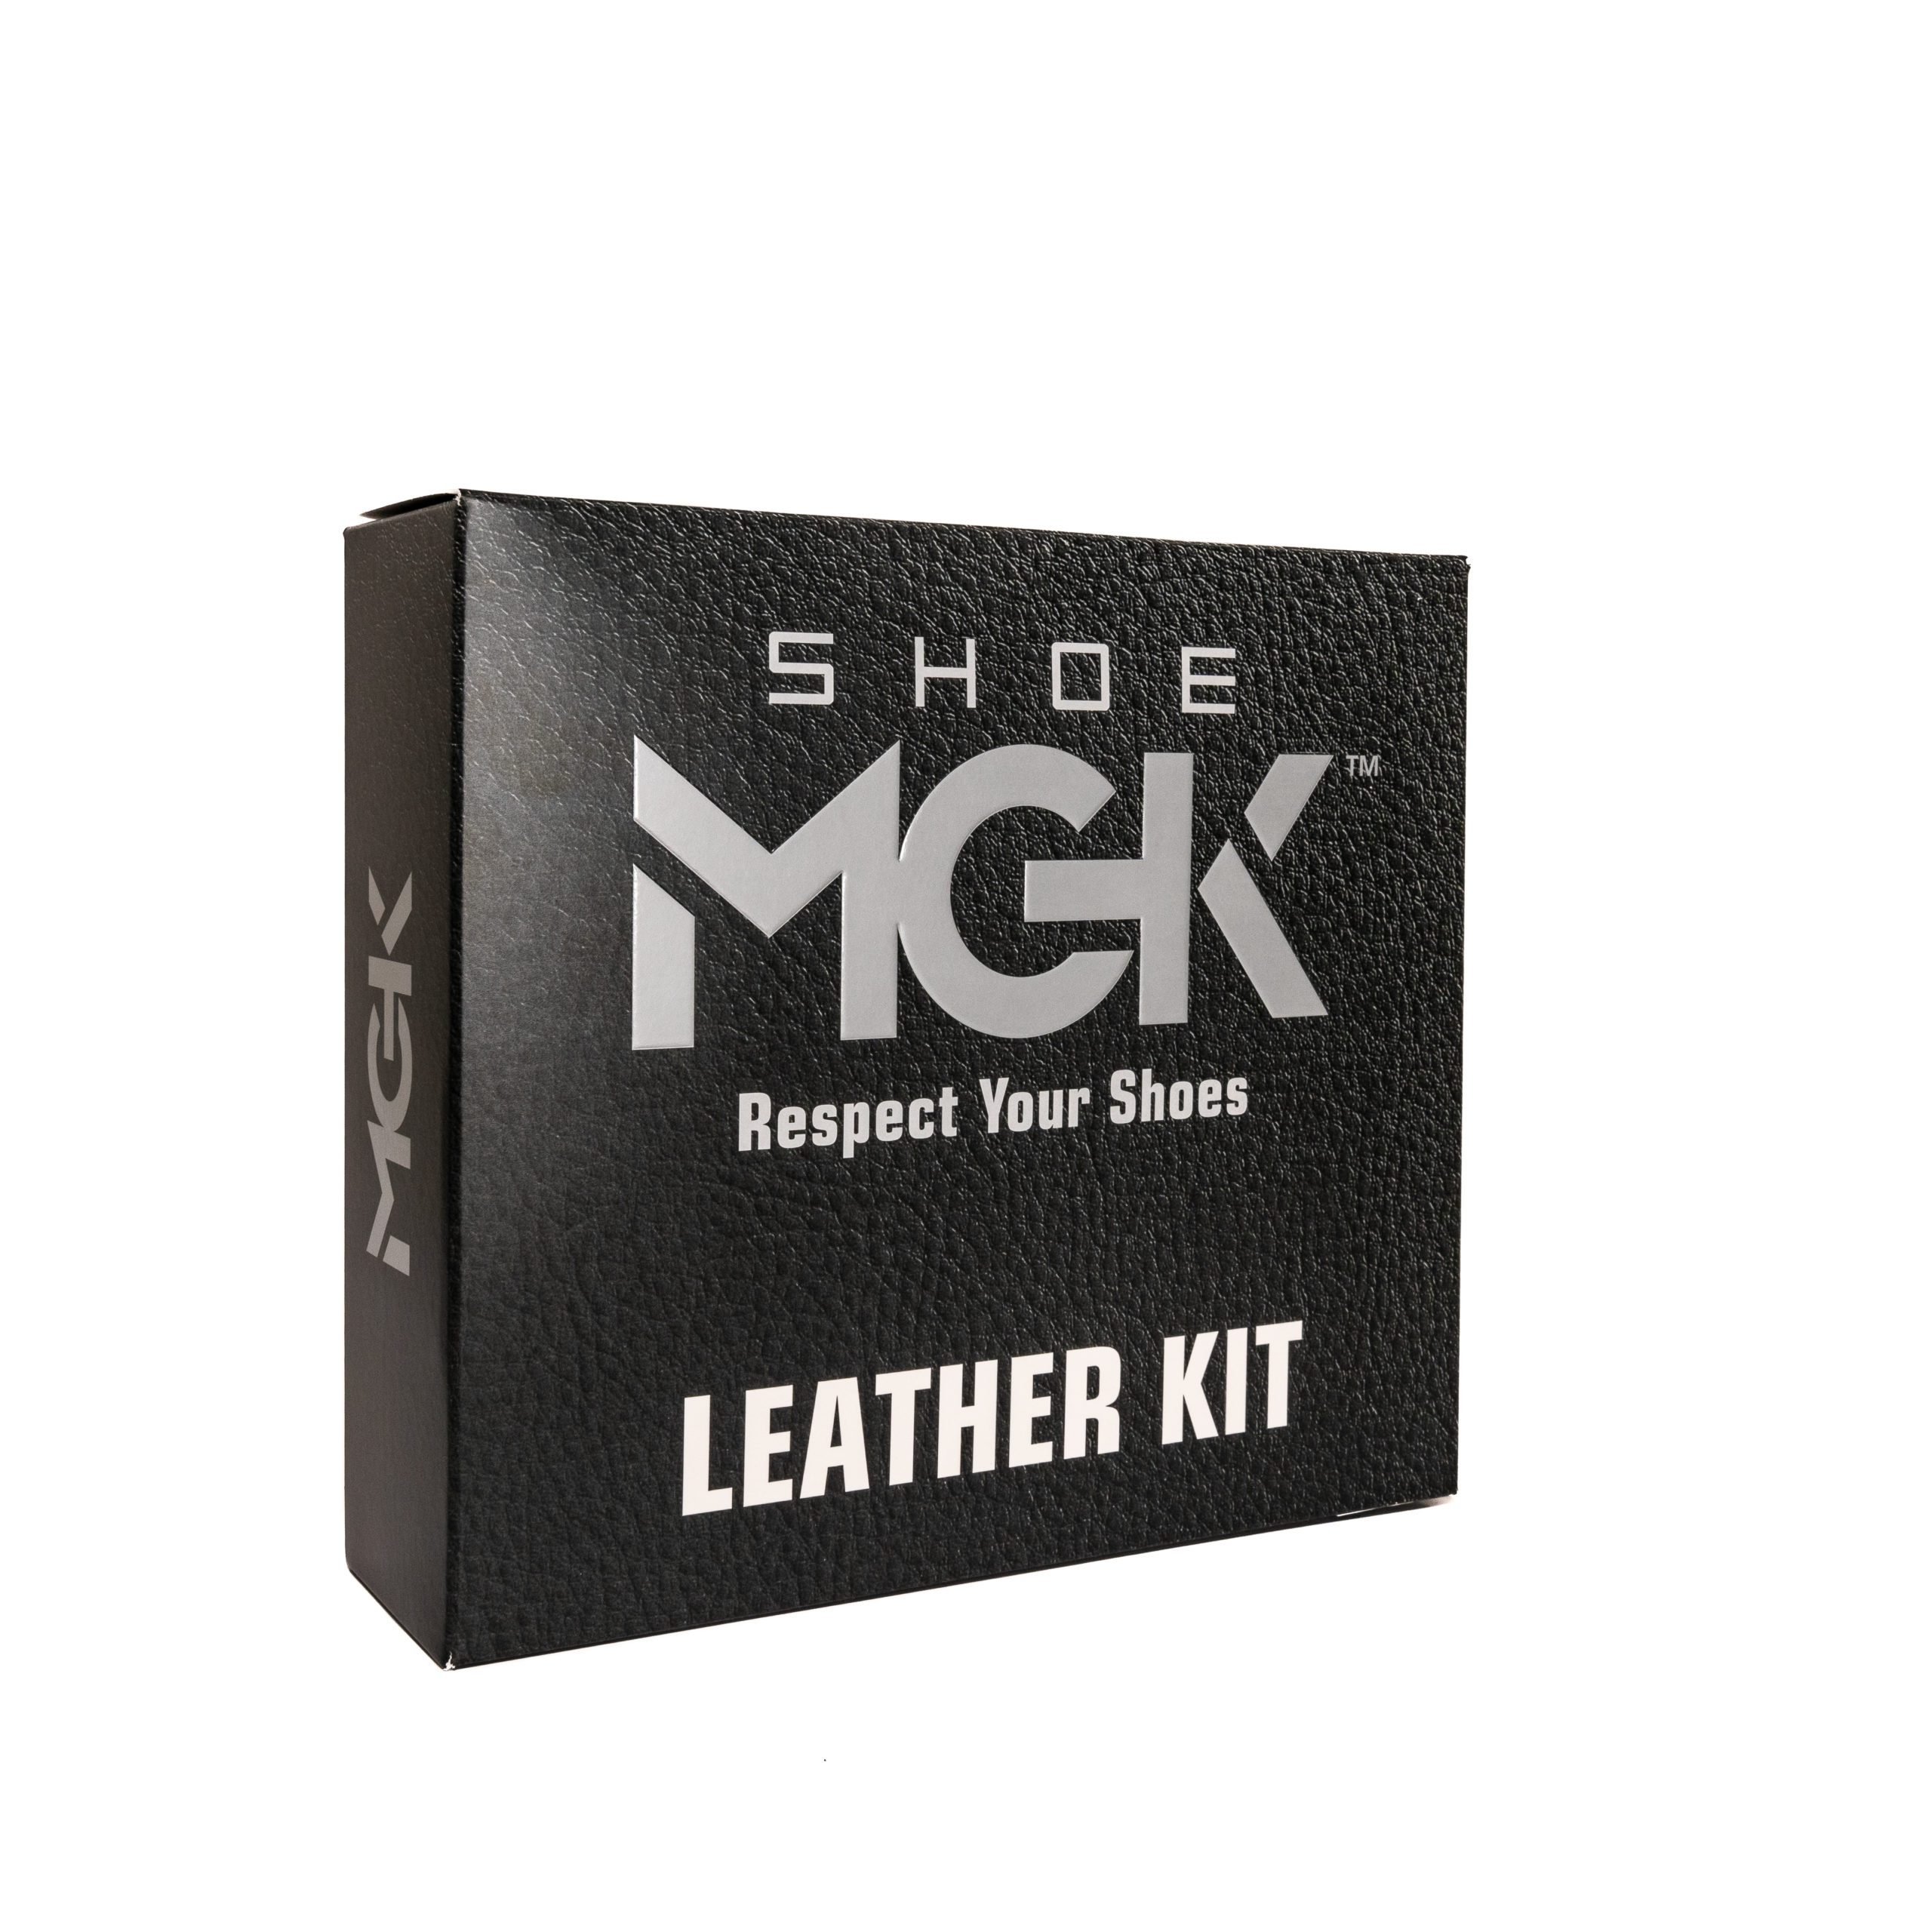 Shoe MGK The Leather Care Kit XL